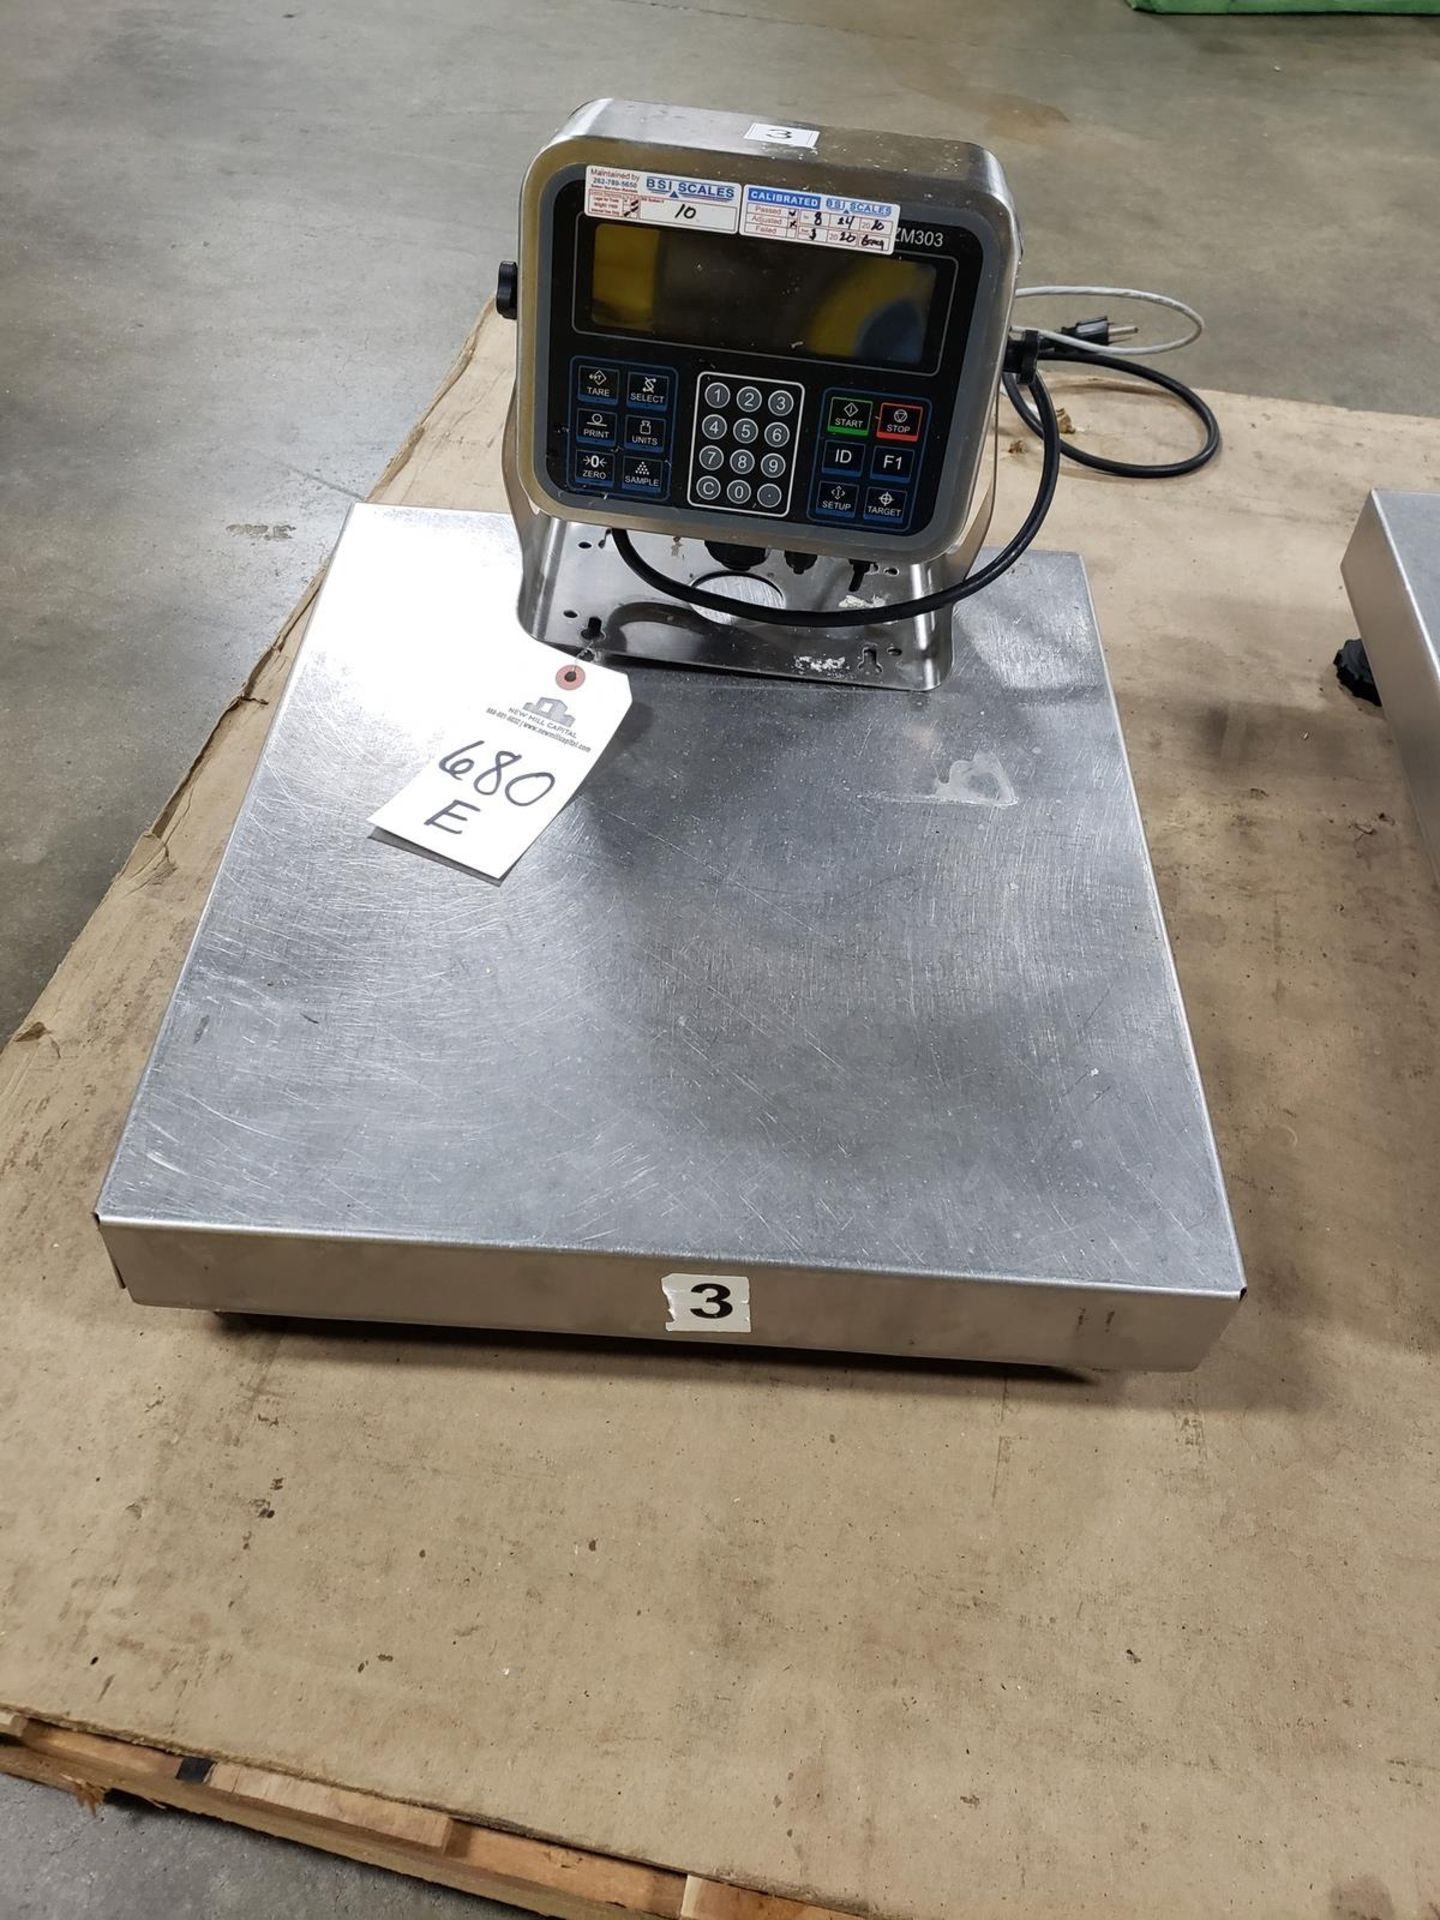 Avery Weigh Tronix Scale, M# ZM303-SD1, S/N 134250430 | Rig Fee $50